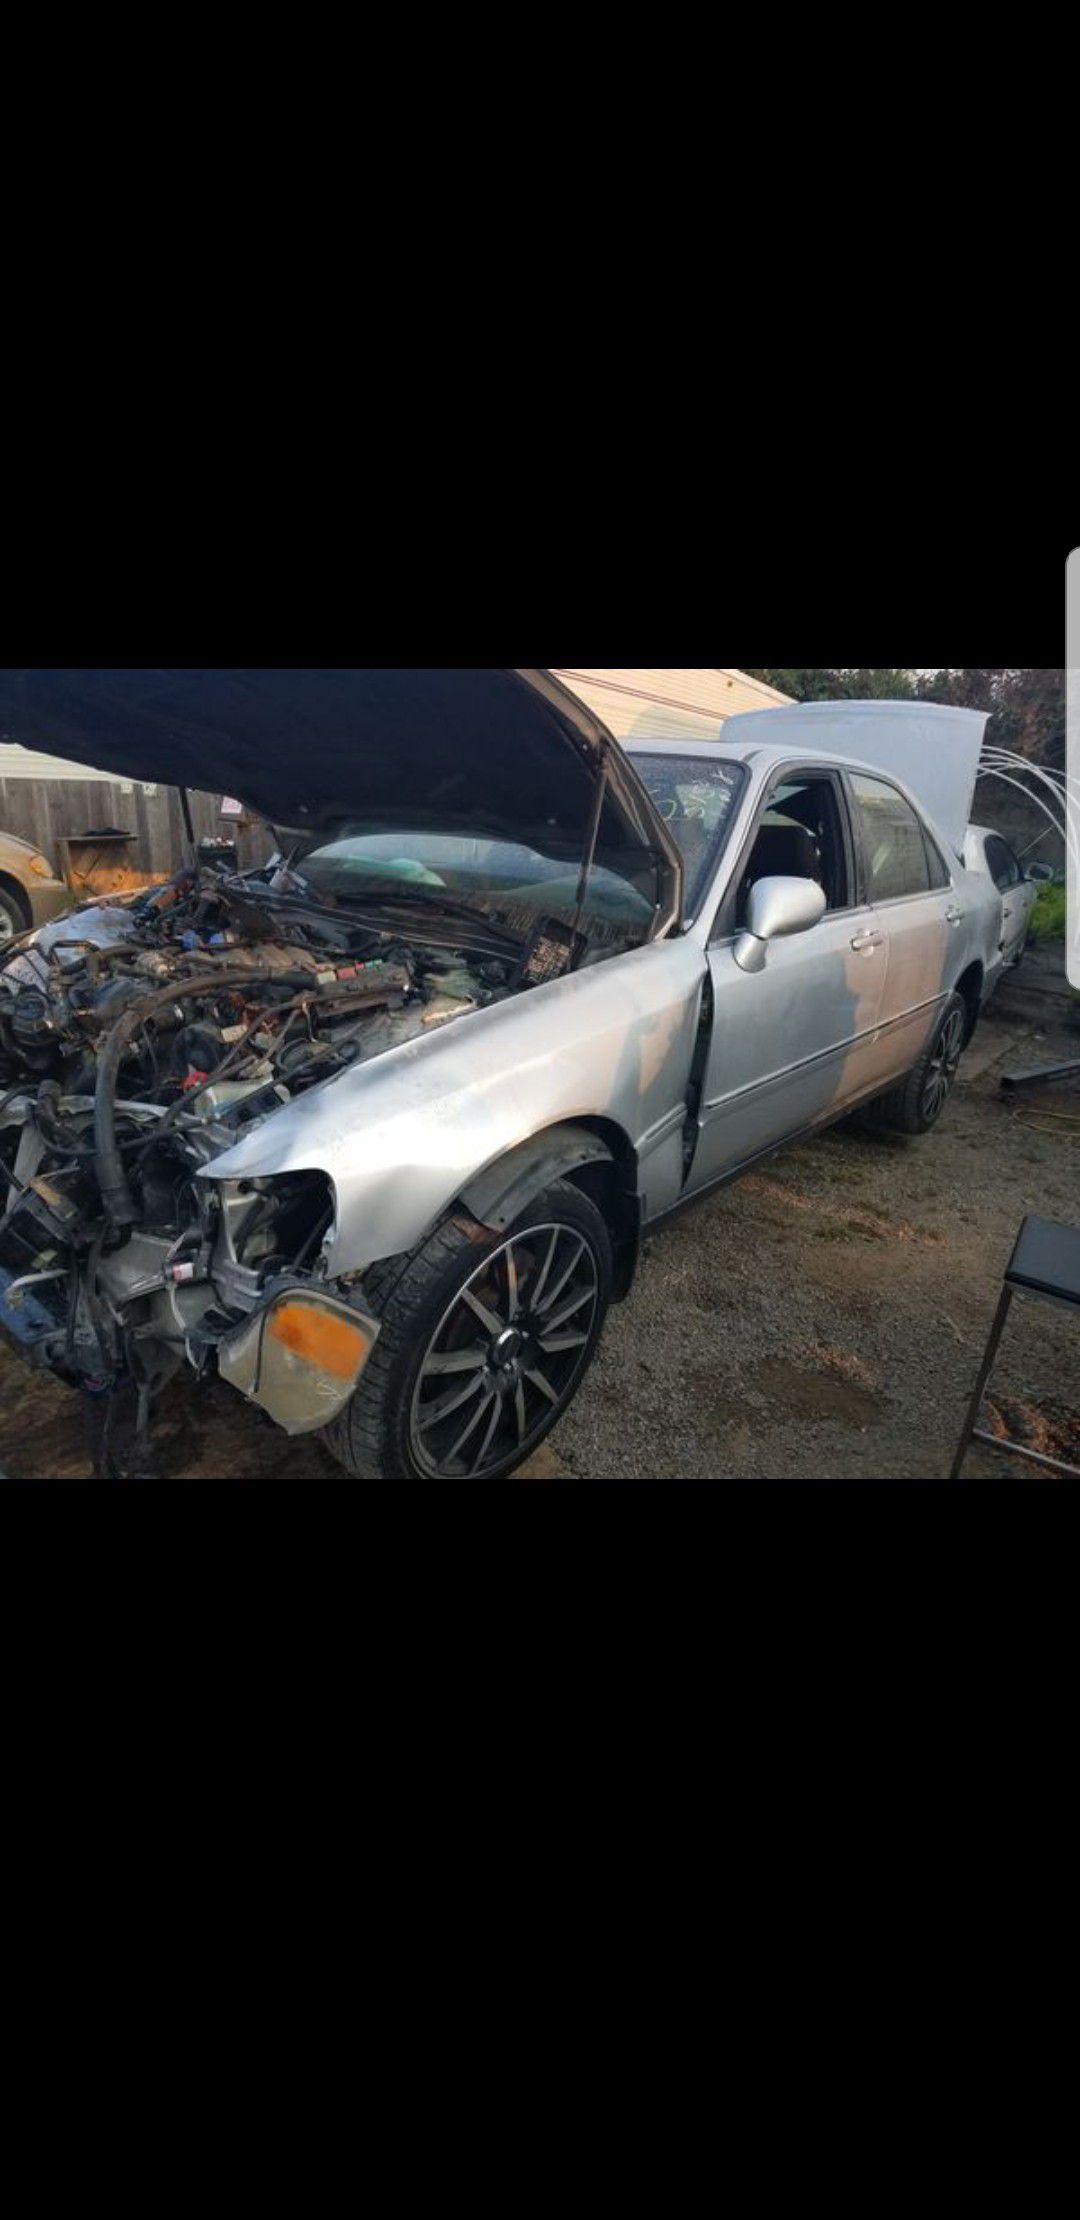 2000 Acura RL parts / parting out